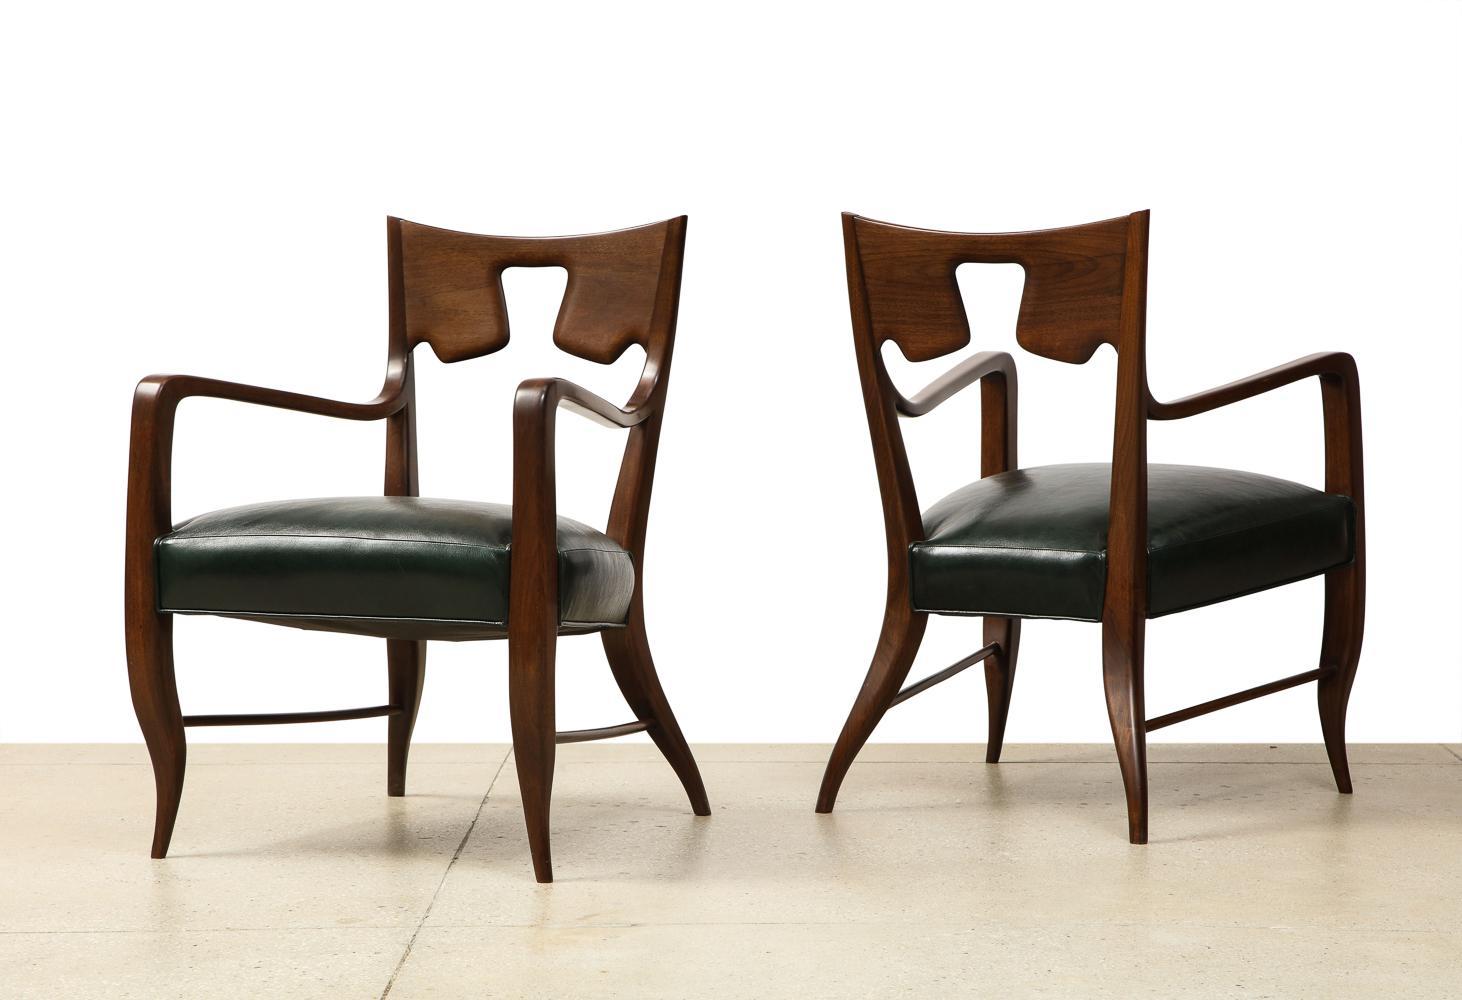 Dark-stained walnut frames & leather seats. Produced by Giordano Chiesa. Wood has recently been refinished and seats have been re-upholstered. These chairs have been authenticated by the Gio Ponti Archives.